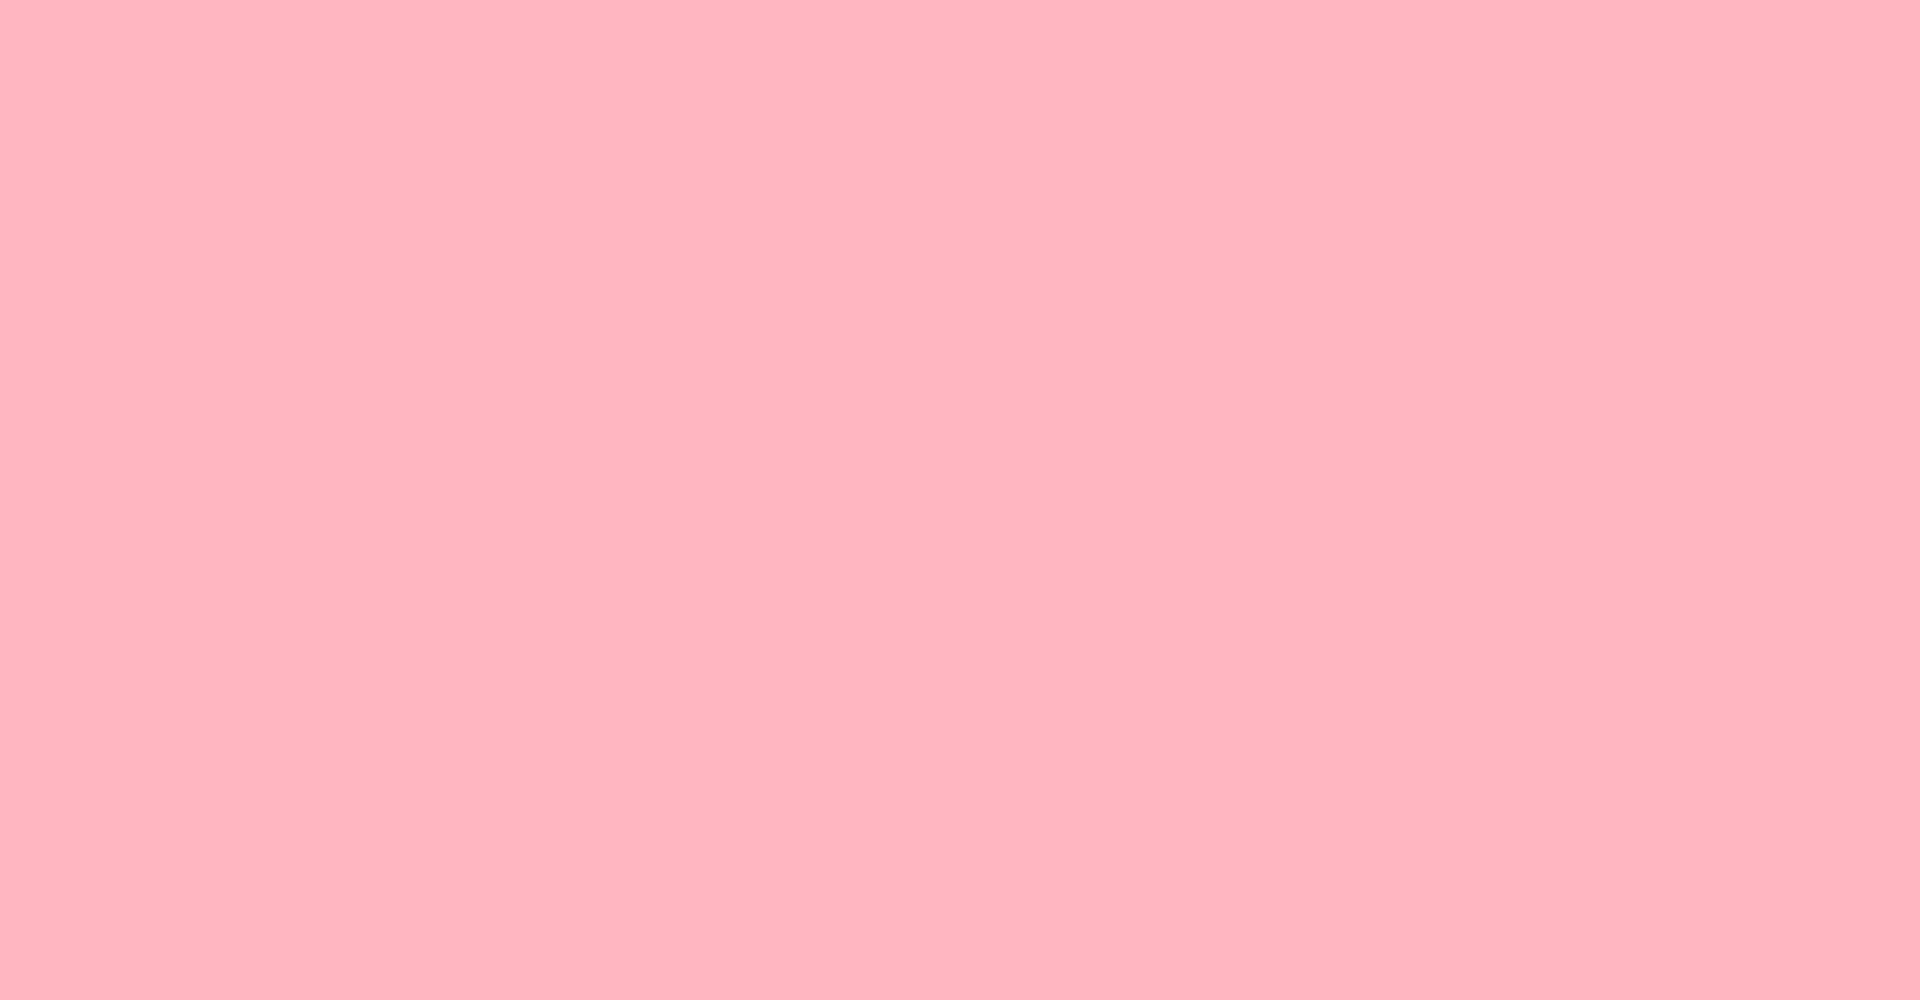 https://www.colorpsychology.org/wp-content/uploads/2023/01/shades-pink.webp